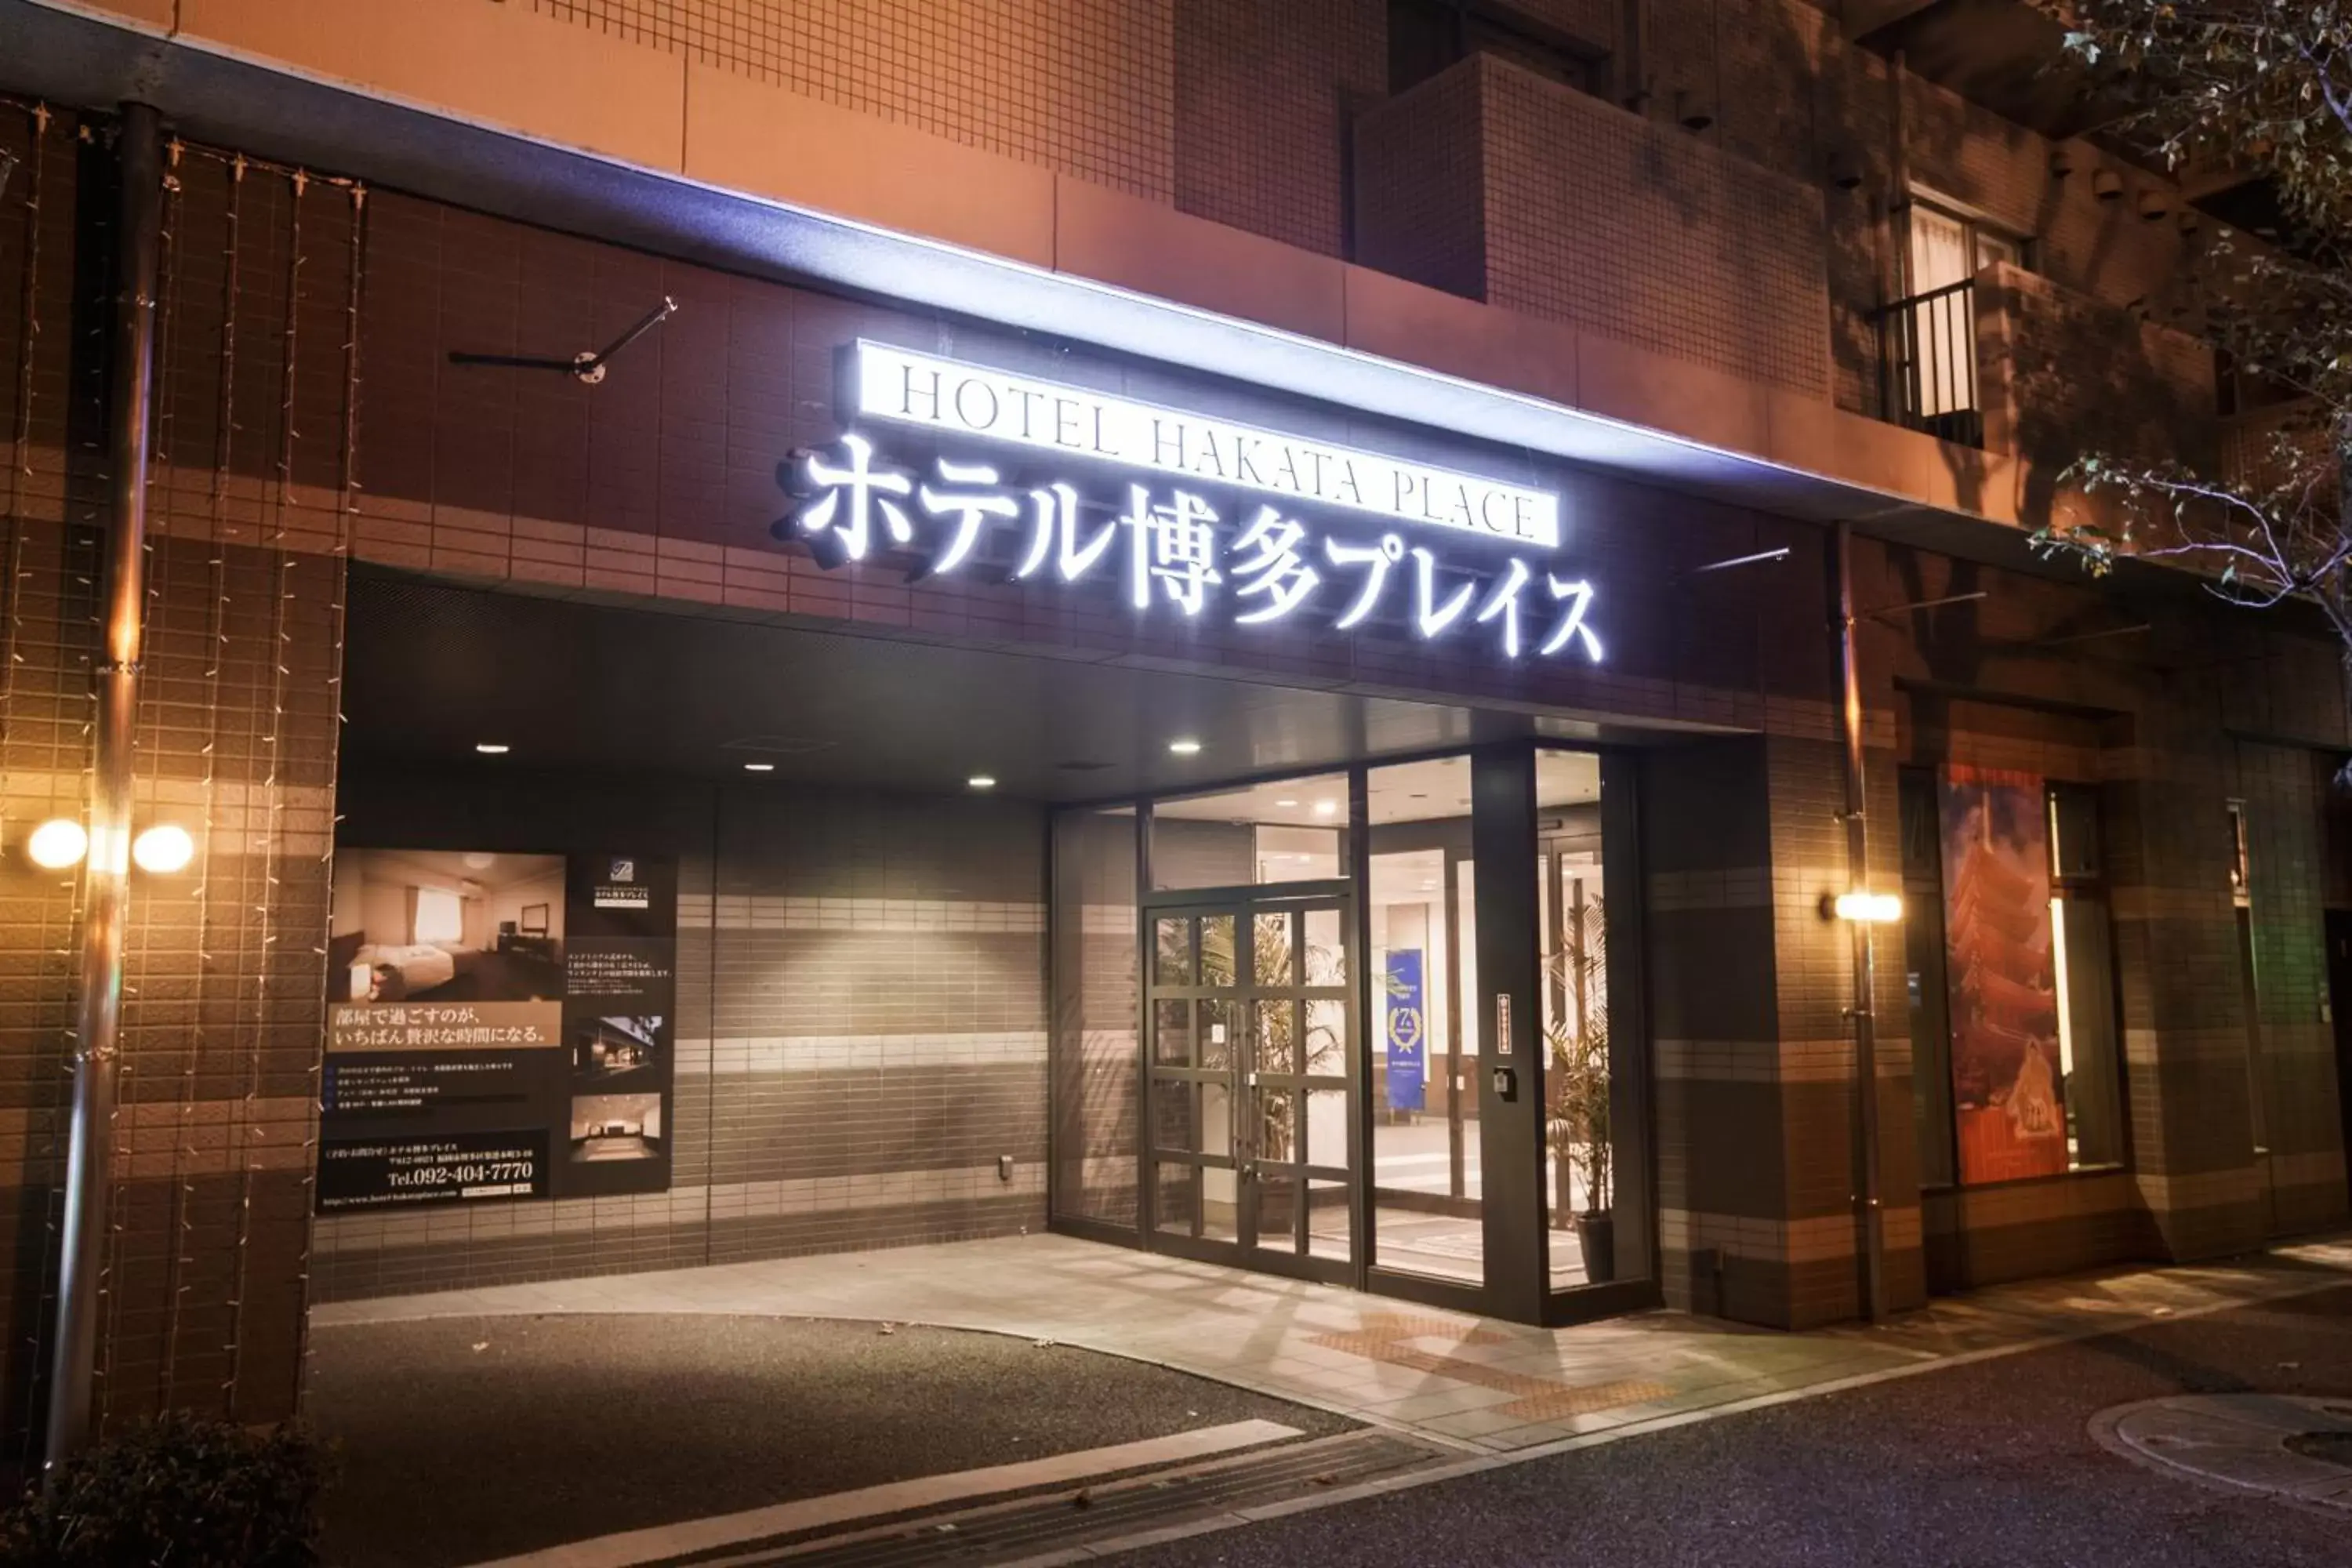 Property building in Hotel Hakata Place